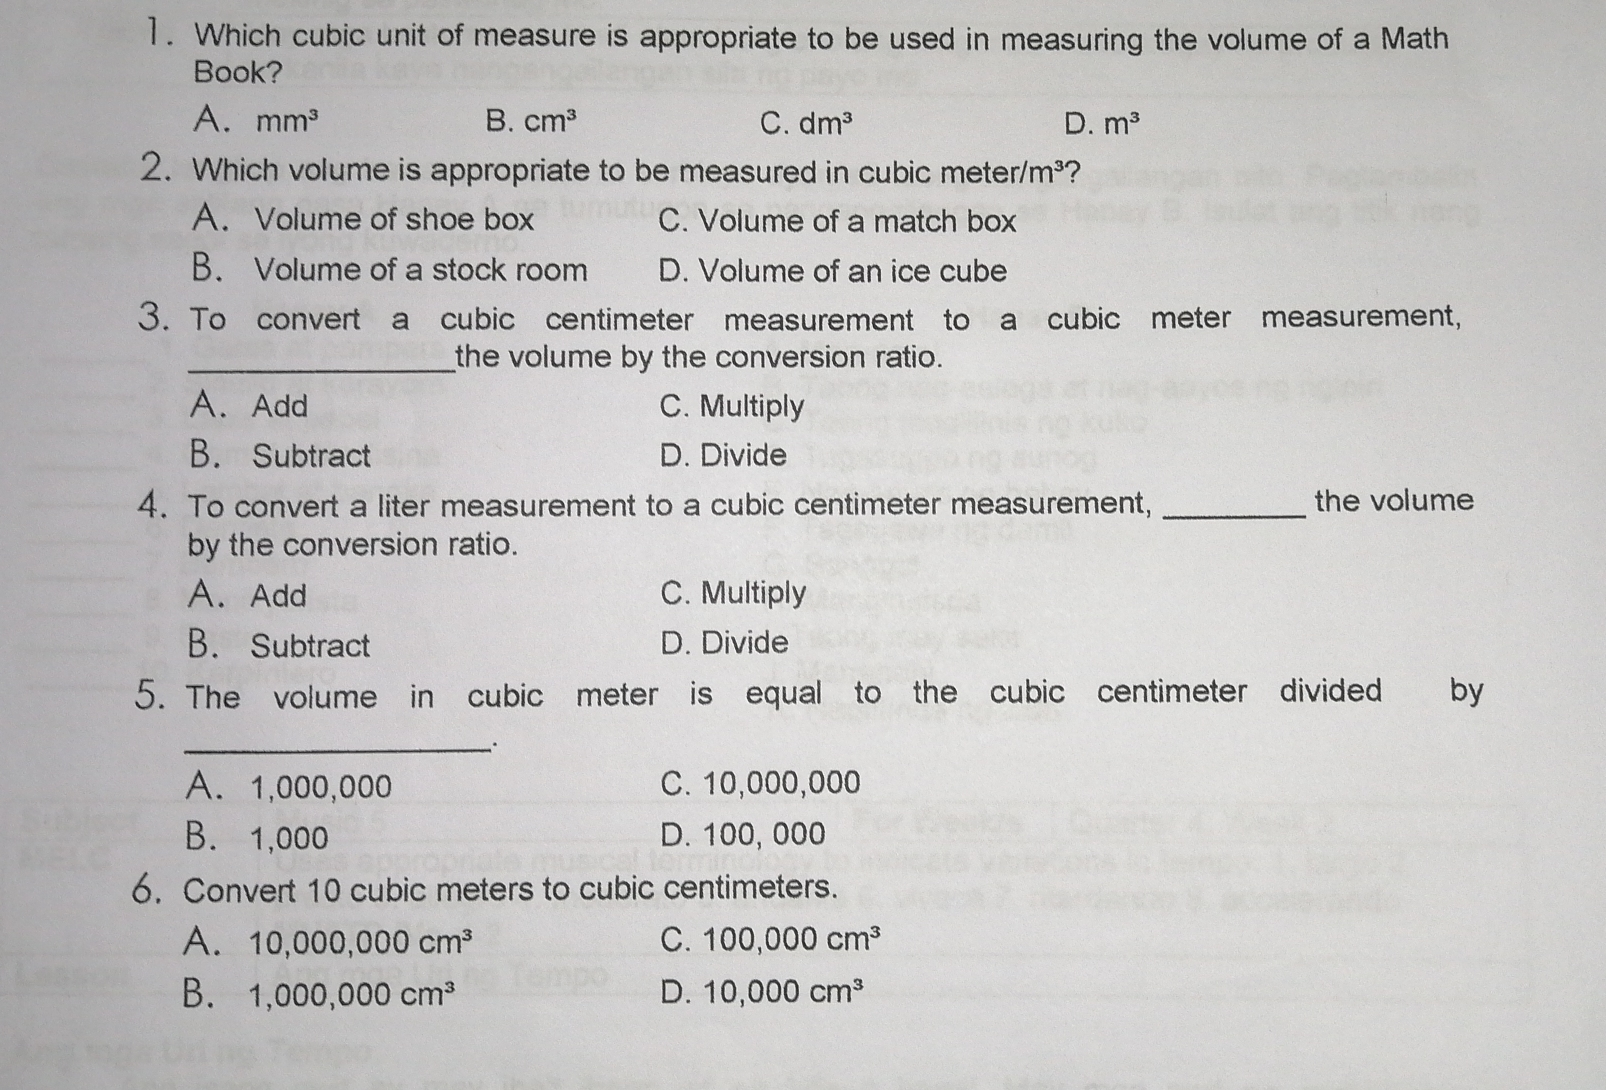 1. Which cubic unit of measure is appropriate to be used in measuring the volume of a Math Book? A. mm3 B. cm3 C. dm3 d. m3 2. Which volume is appropriate to be measured in cubic meter/m³? A. Volume of shoe box C. Volume of a match box B. Volume of a stock room D. Volume of an ice cube 3. To convert a cubic centimeter measurement to a cubic meter measurement, the volume by the conversion ratio. A.Add C. Multiply B. Subtract D. Divide 4. To convert a liter measurement to a cubic centimeter measurement,, the volume by the conversion ratio. A. Add C. Multiply B. Subtract D. Divide 5. The volume in cubic meter is equal to the cubic centimeter divided by _ A. 1,000,000 C. 10,000,000 B.1,000 D. 100,000 6. Convert 10 cubic meters to cubic centimeters. A. 10,000,000 cm3 C. 100,000 cm3 B. 1,000,000 cm3 D. 10,000 cm3